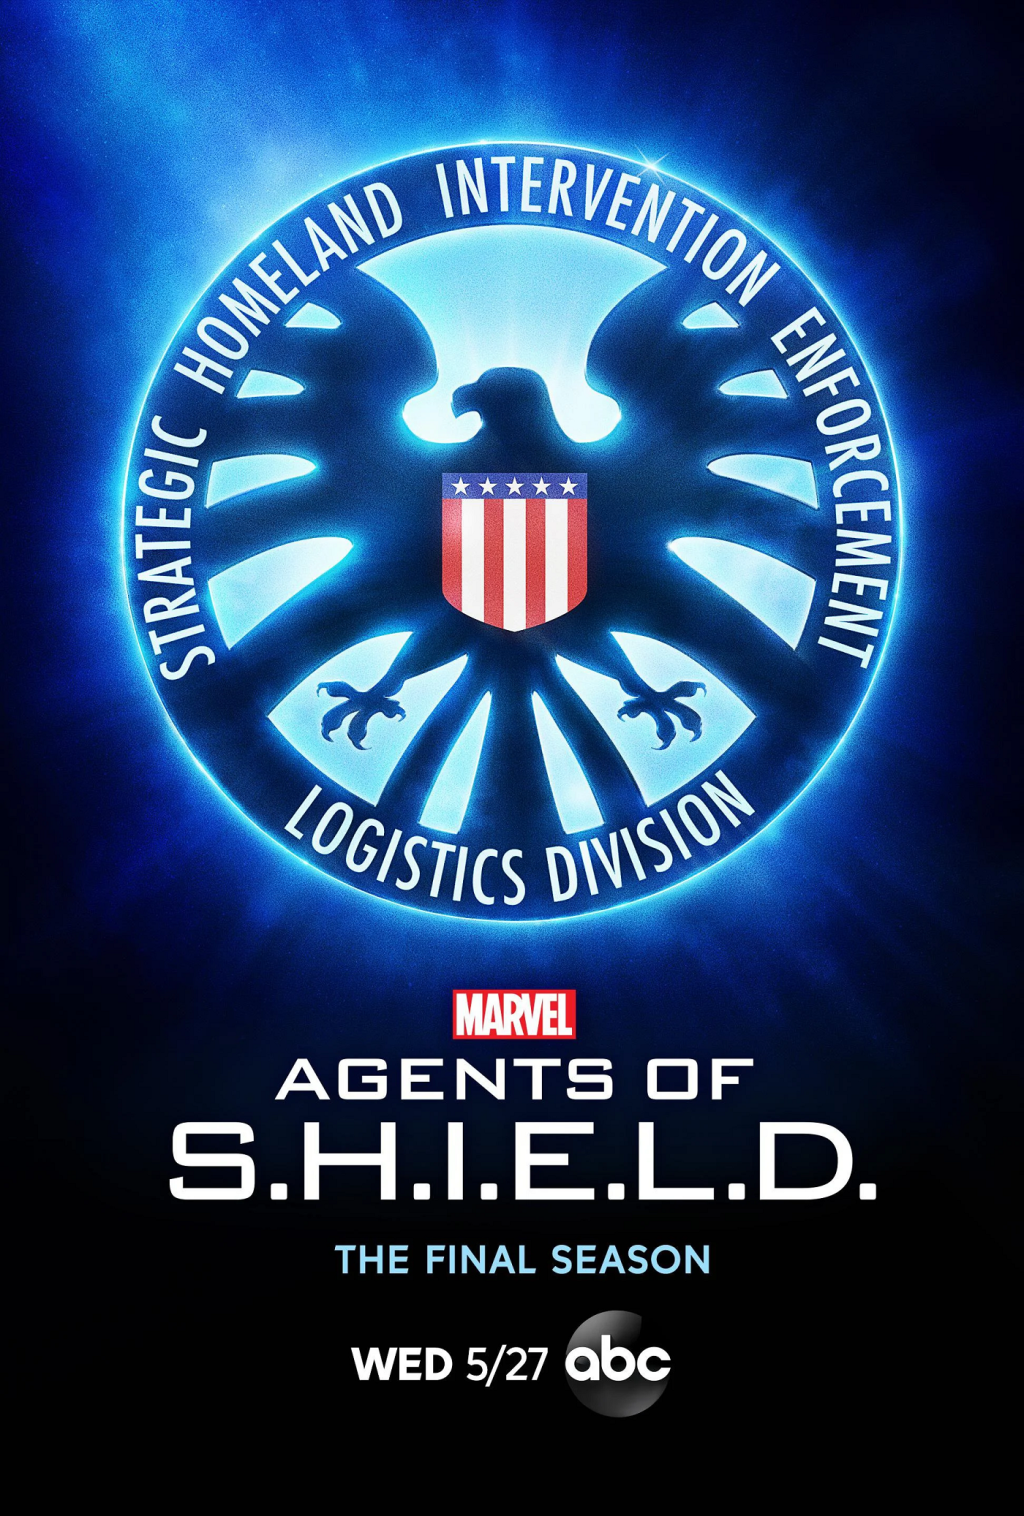 Agents Of S.H.I.E.L.D. (ABC, 2013-2020) - David Smith joins Tim Worthington for a chat about the wild time-hopping genre-switching alternate reality-bending mission to stop history being entirely rewritten by aliens with access to TV Tropes in Series Seven of Agents Of S.H.I.E.L.D. in It's Good, Except It Sucks - a movie by movie - and television series by television series - hurtle through the Marvel Cinematic Universe.